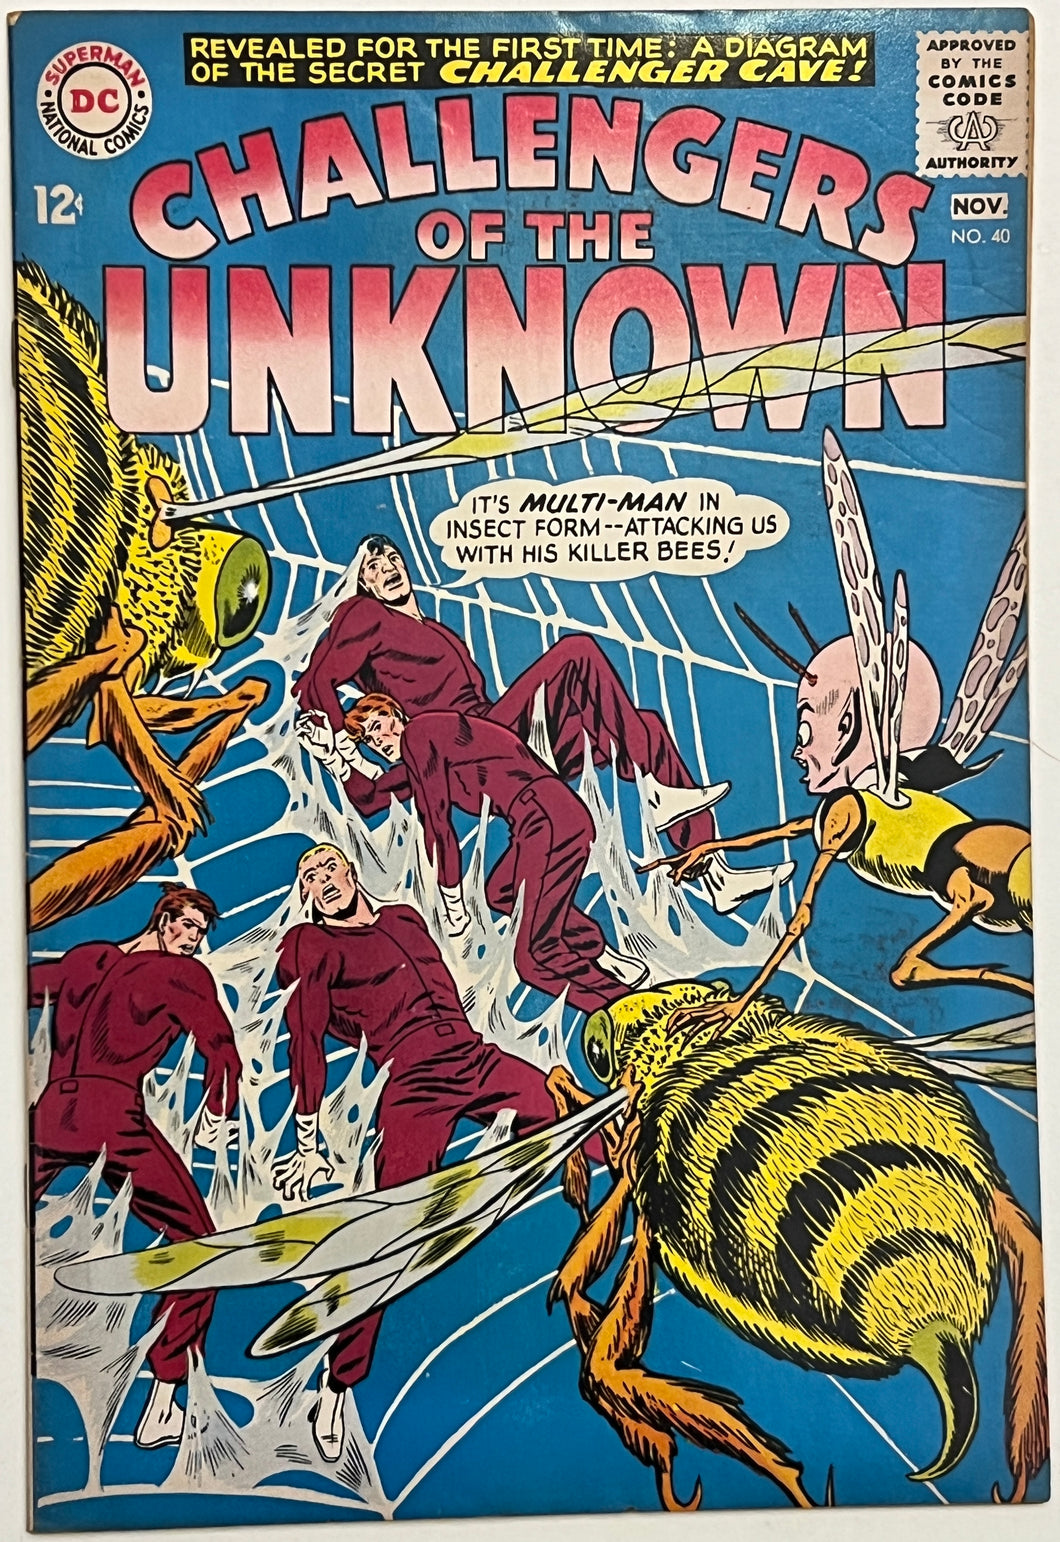 Challengers of the Unknown #40 (1964)